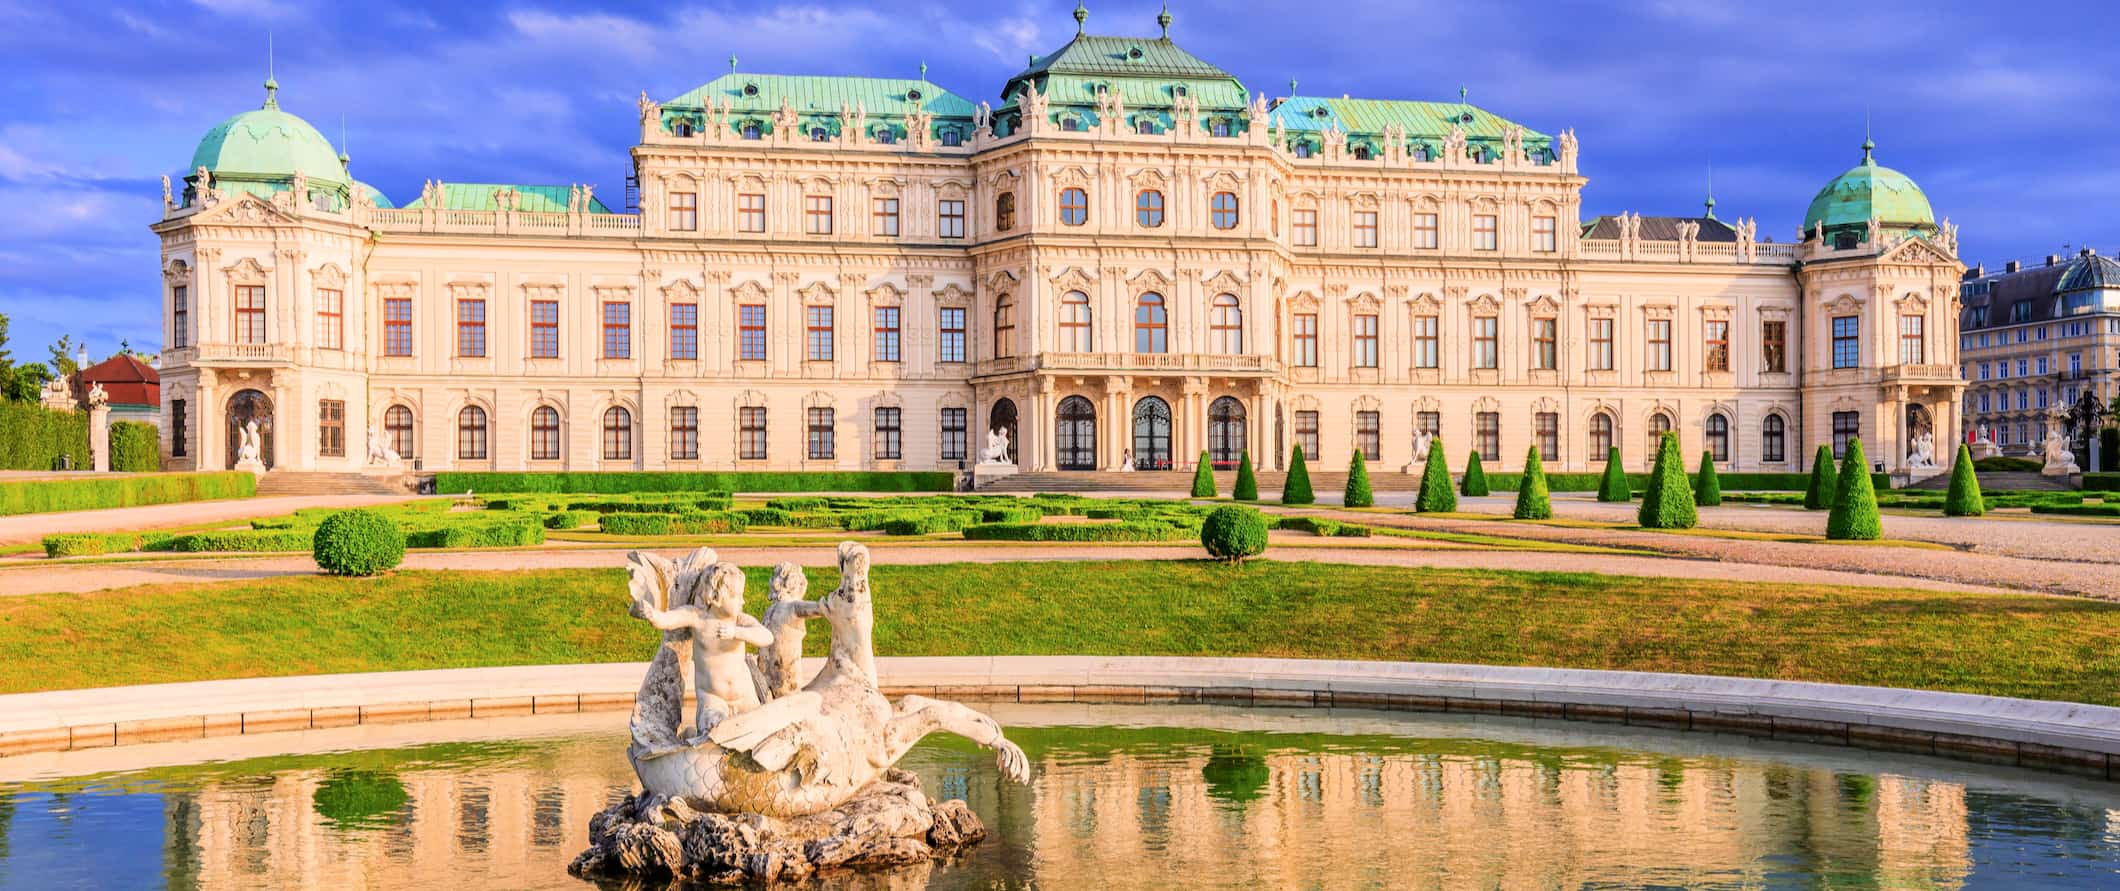 A huge, historic palace in beautiful Vienna, Austria